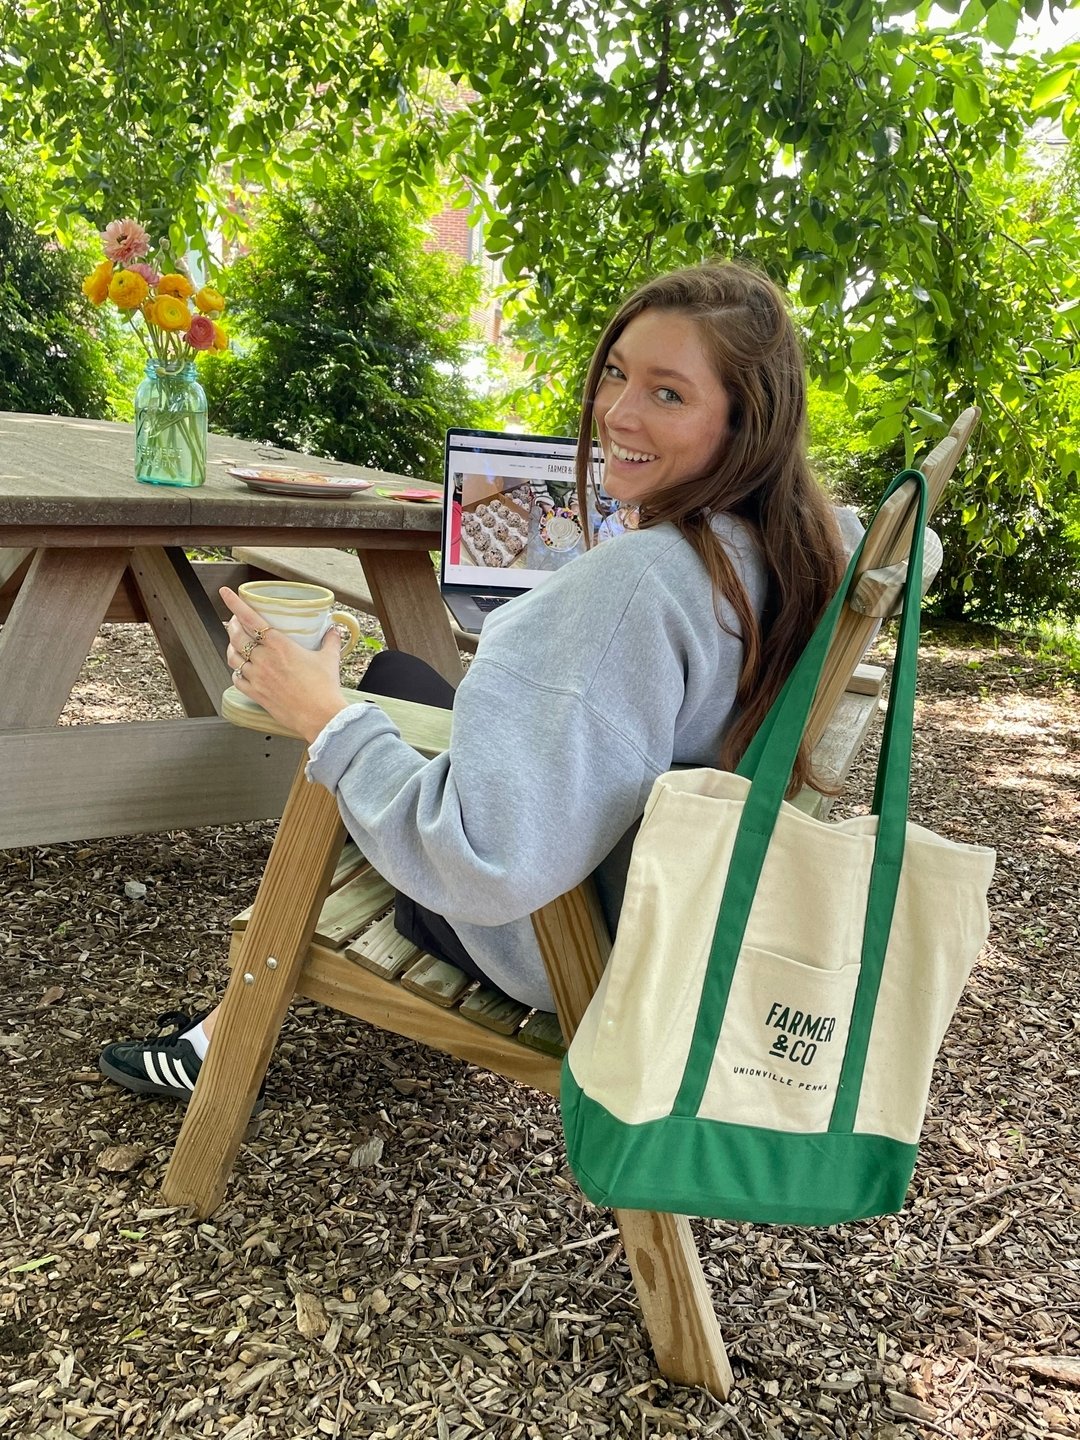 When you&rsquo;re Director of Operations of a coffee shop, having the right tools are important. Kayli chooses F&amp;C to supply her totes.​​​​​​​​​💁&zwj;♀️